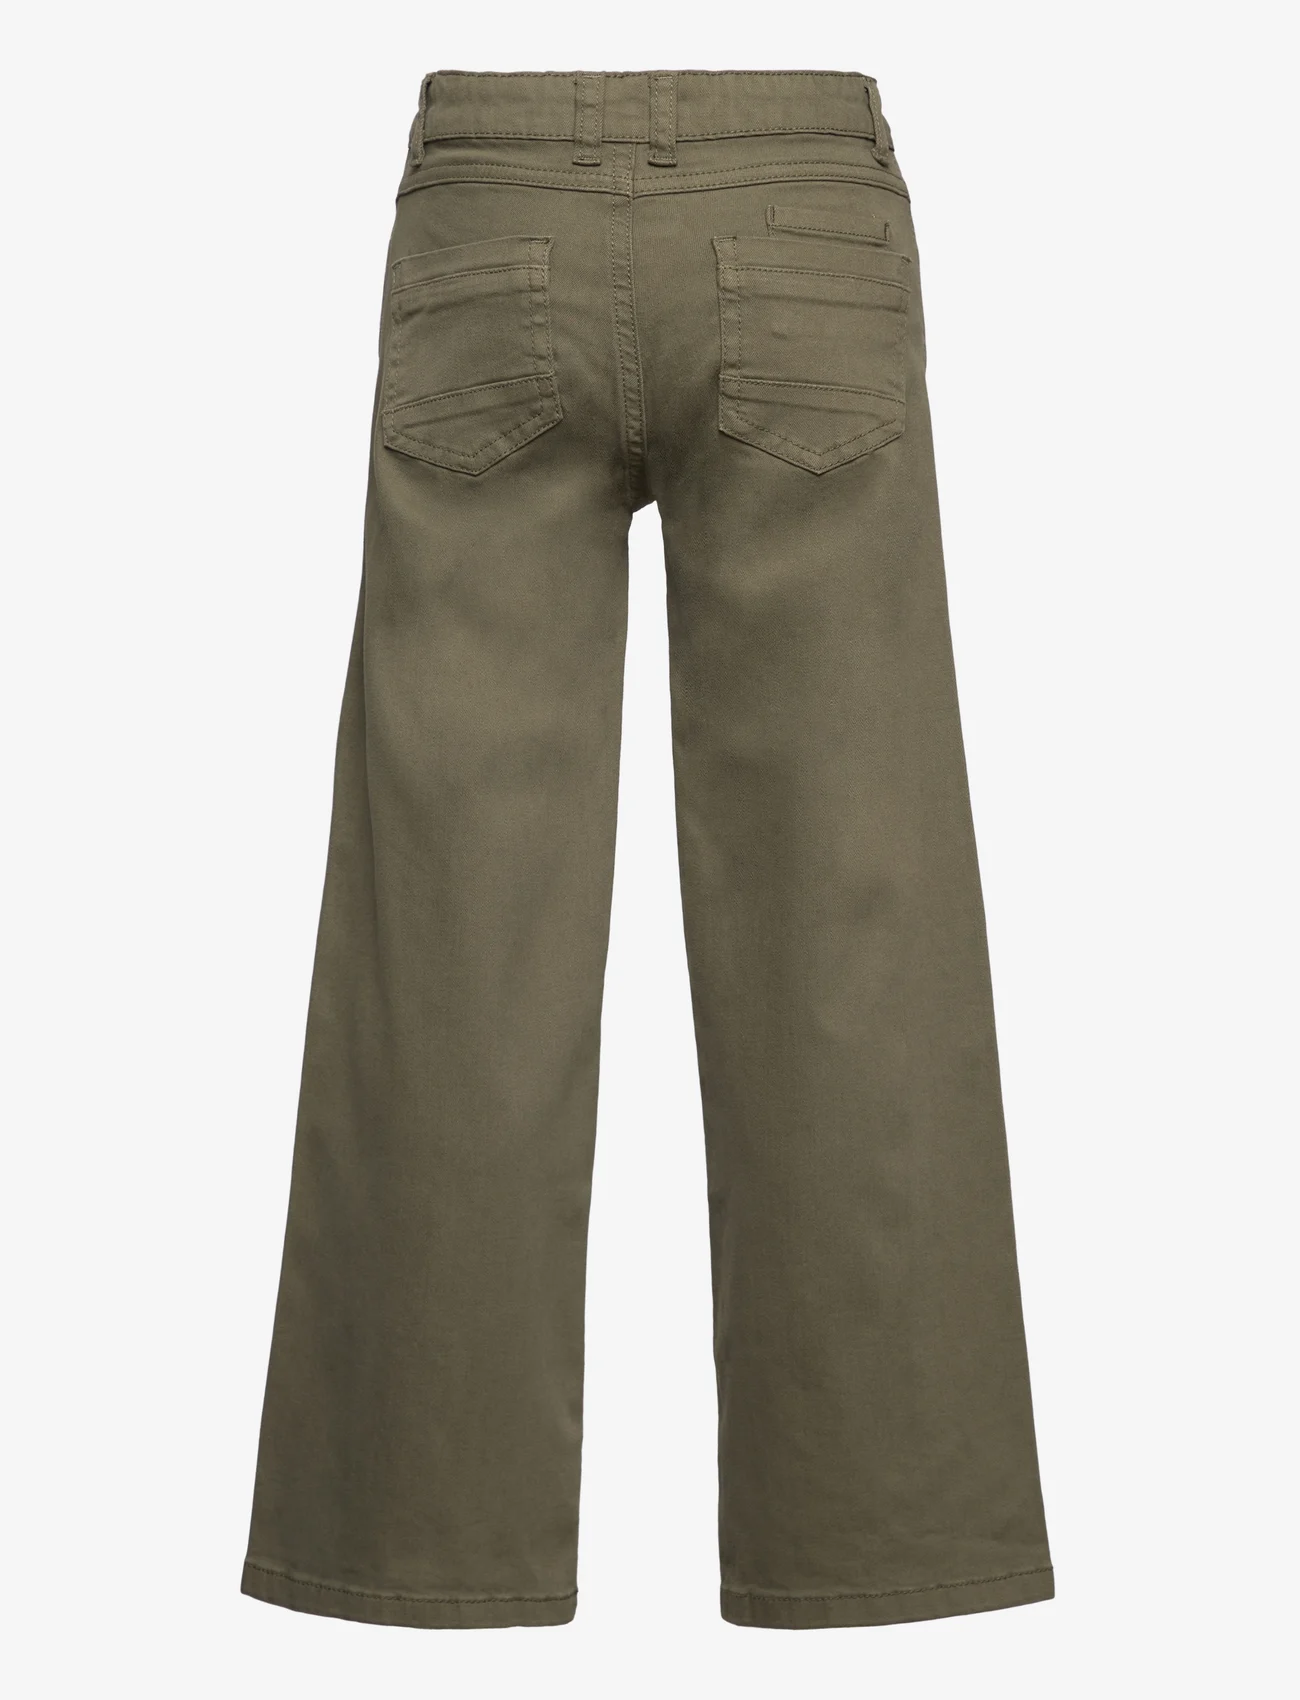 Creamie - Jeans Wide - vide jeans - olive night - 1